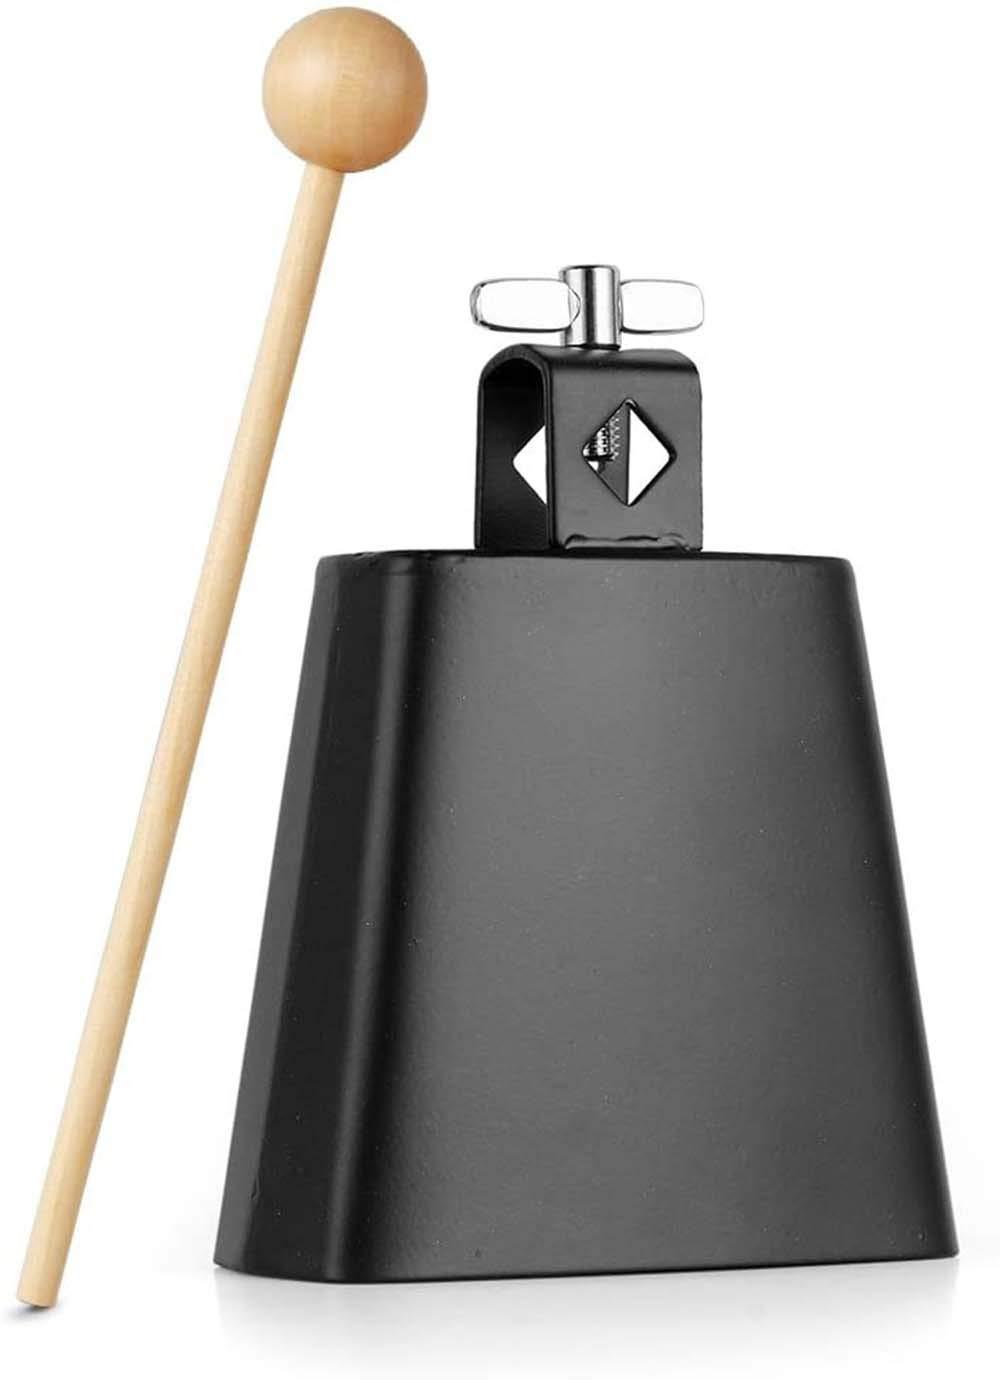 (Black) 4 Inch Metal Steel Cow Bell Noise Maker, percussion instrument with handle stick, for drum set kit percussion Black